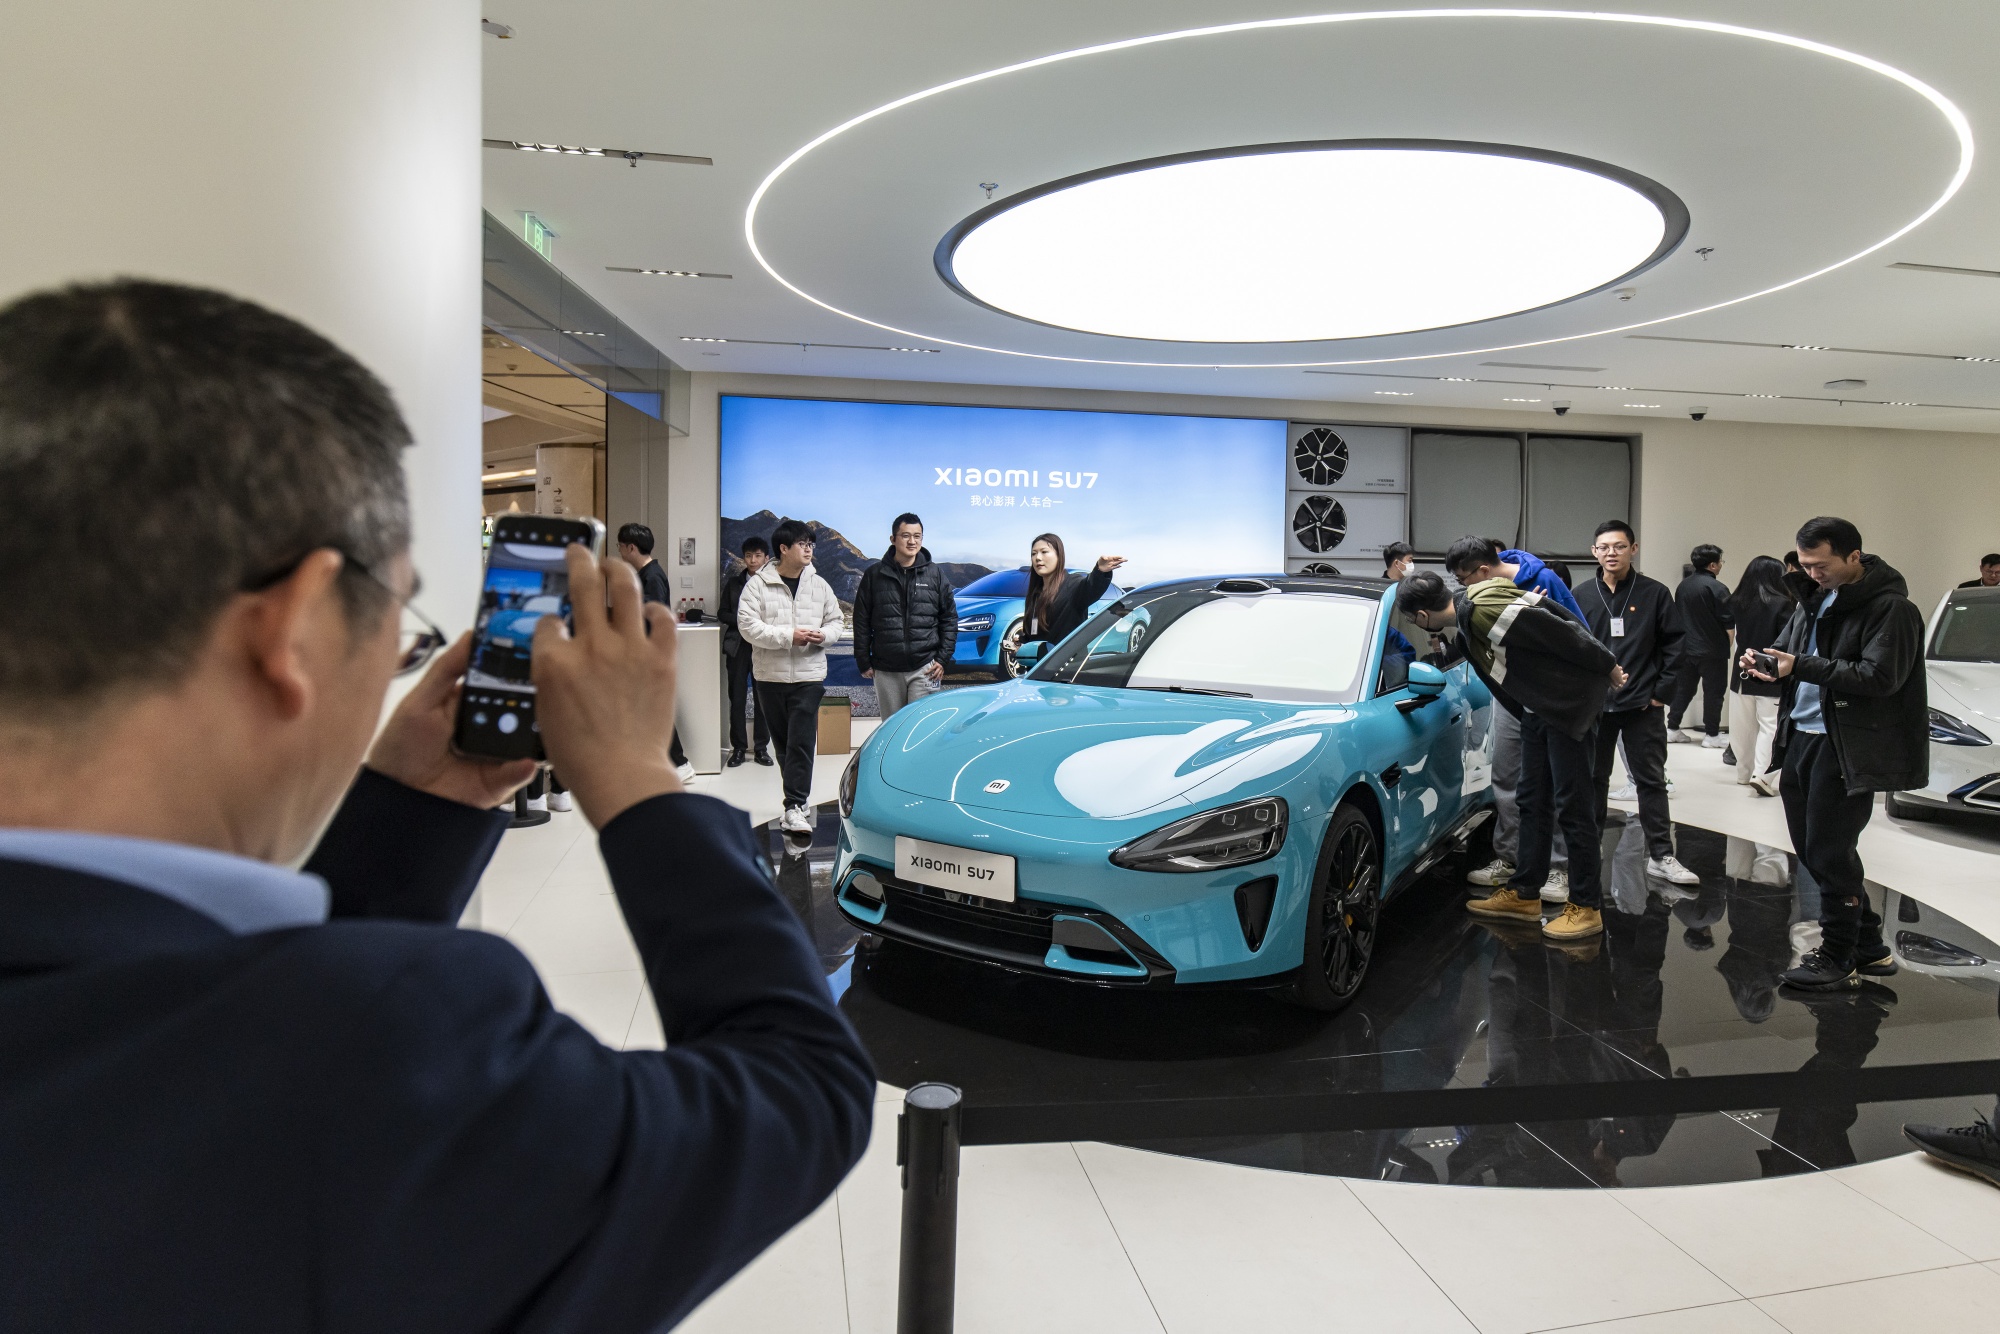 Xiaomi SU7 Electric Vehicle On Display at Stores